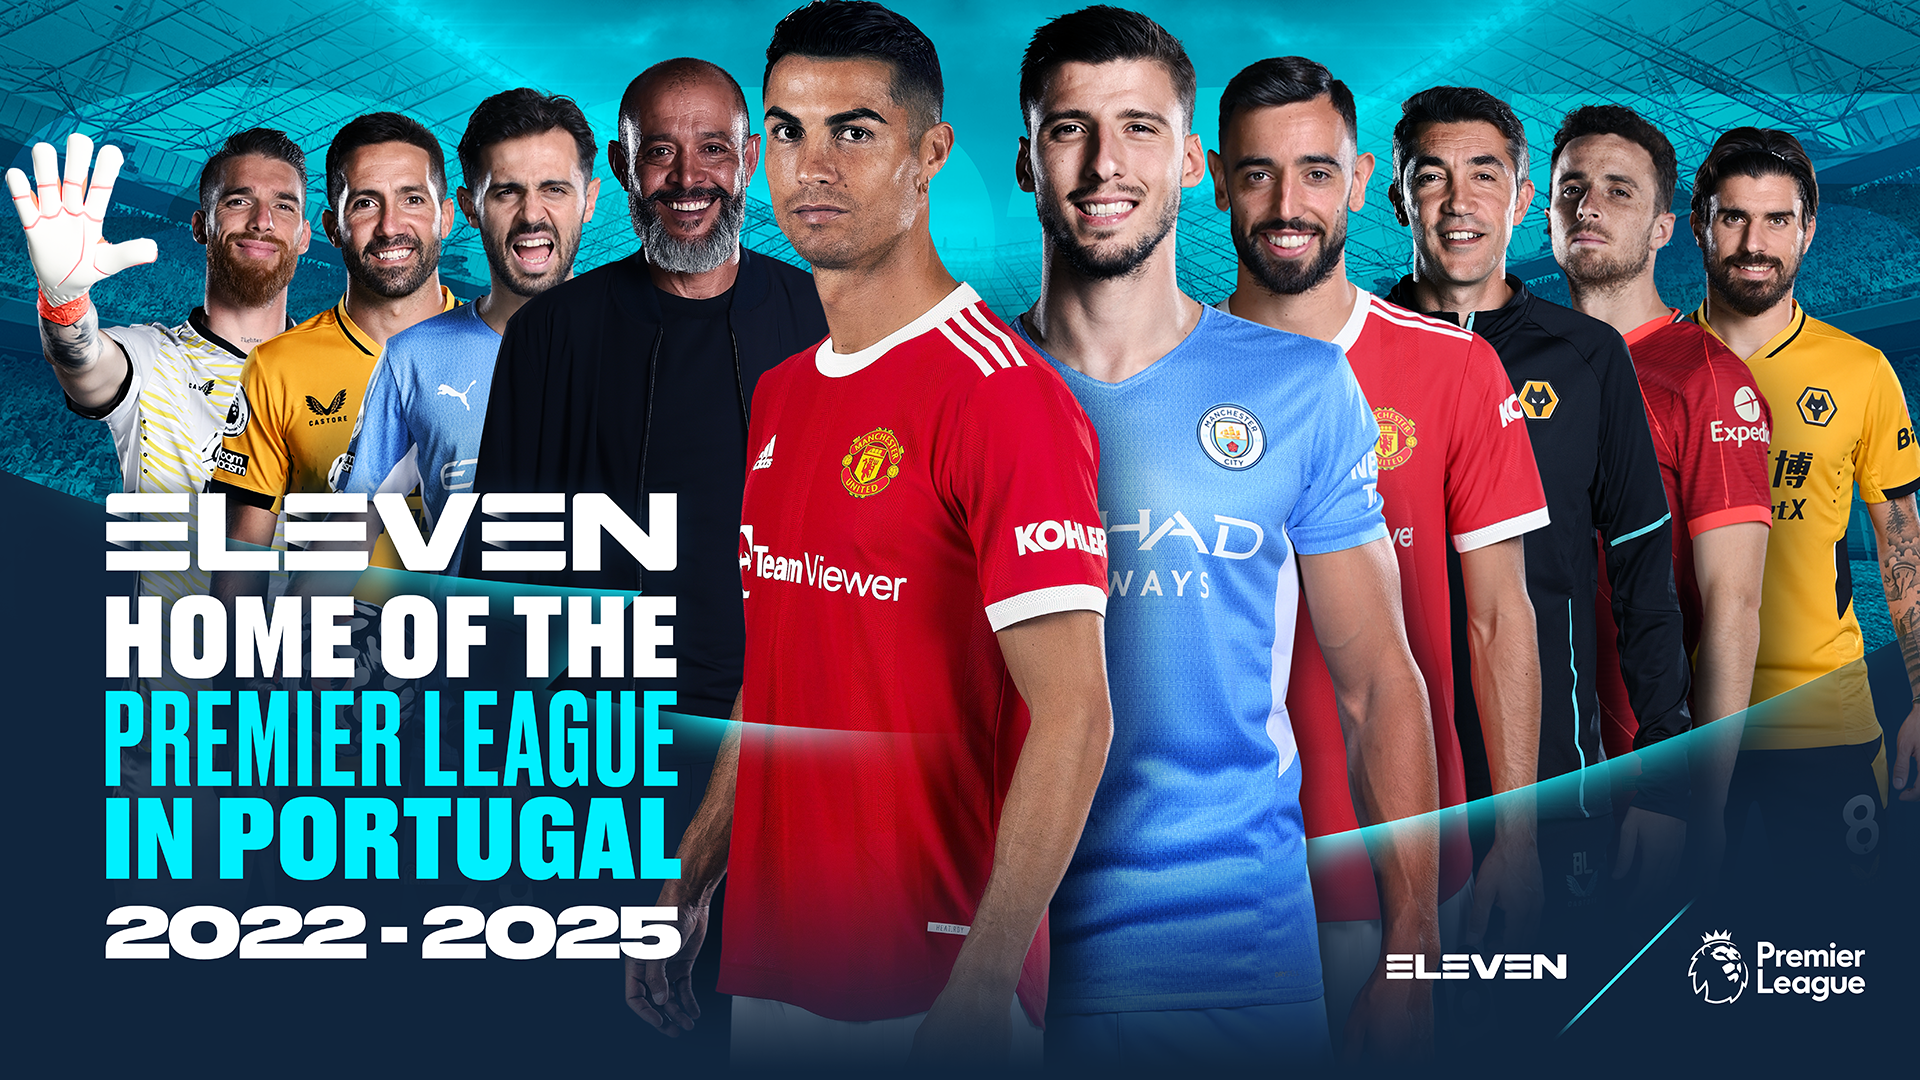 ELEVEN PORTUGAL SECURES EXCLUSIVE PREMIER LEAGUE RIGHTS FROM 2022 TO 2025